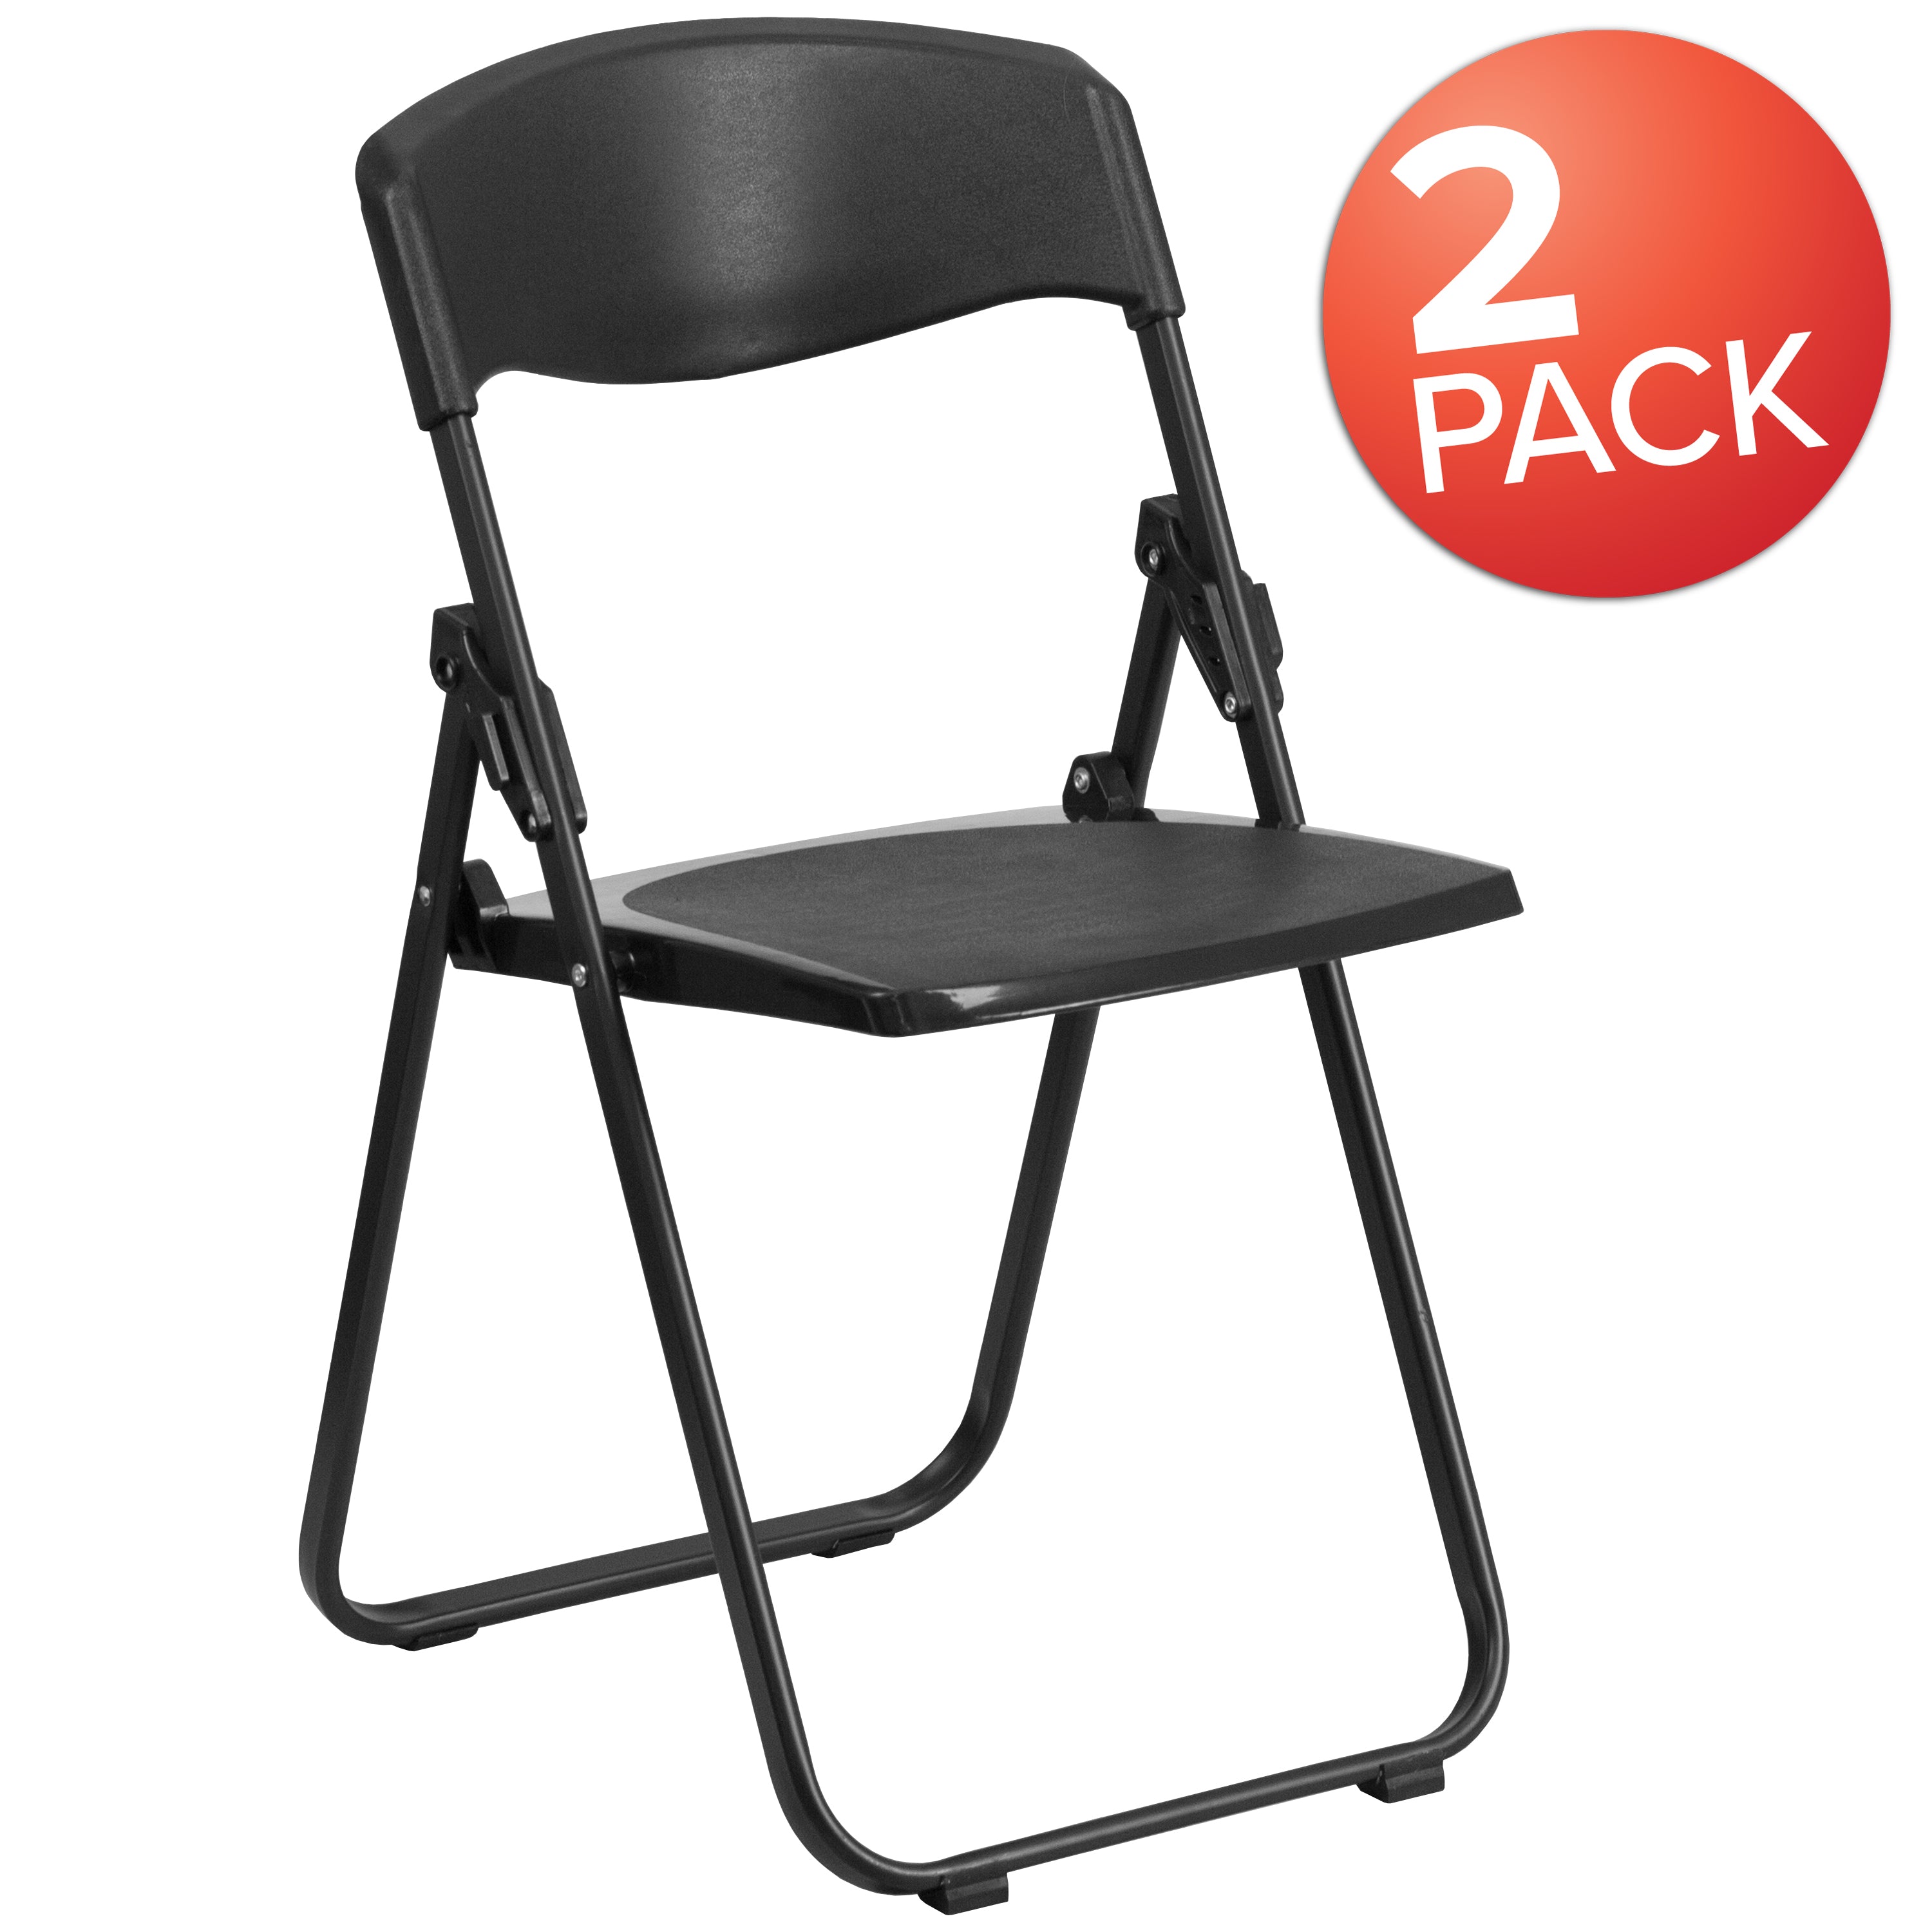 2 Pack HERCULES Series 500 lb. Capacity Heavy Duty Plastic Folding Chair with Built-in Ganging Brackets-Plastic Folding Chair-Flash Furniture-Wall2Wall Furnishings